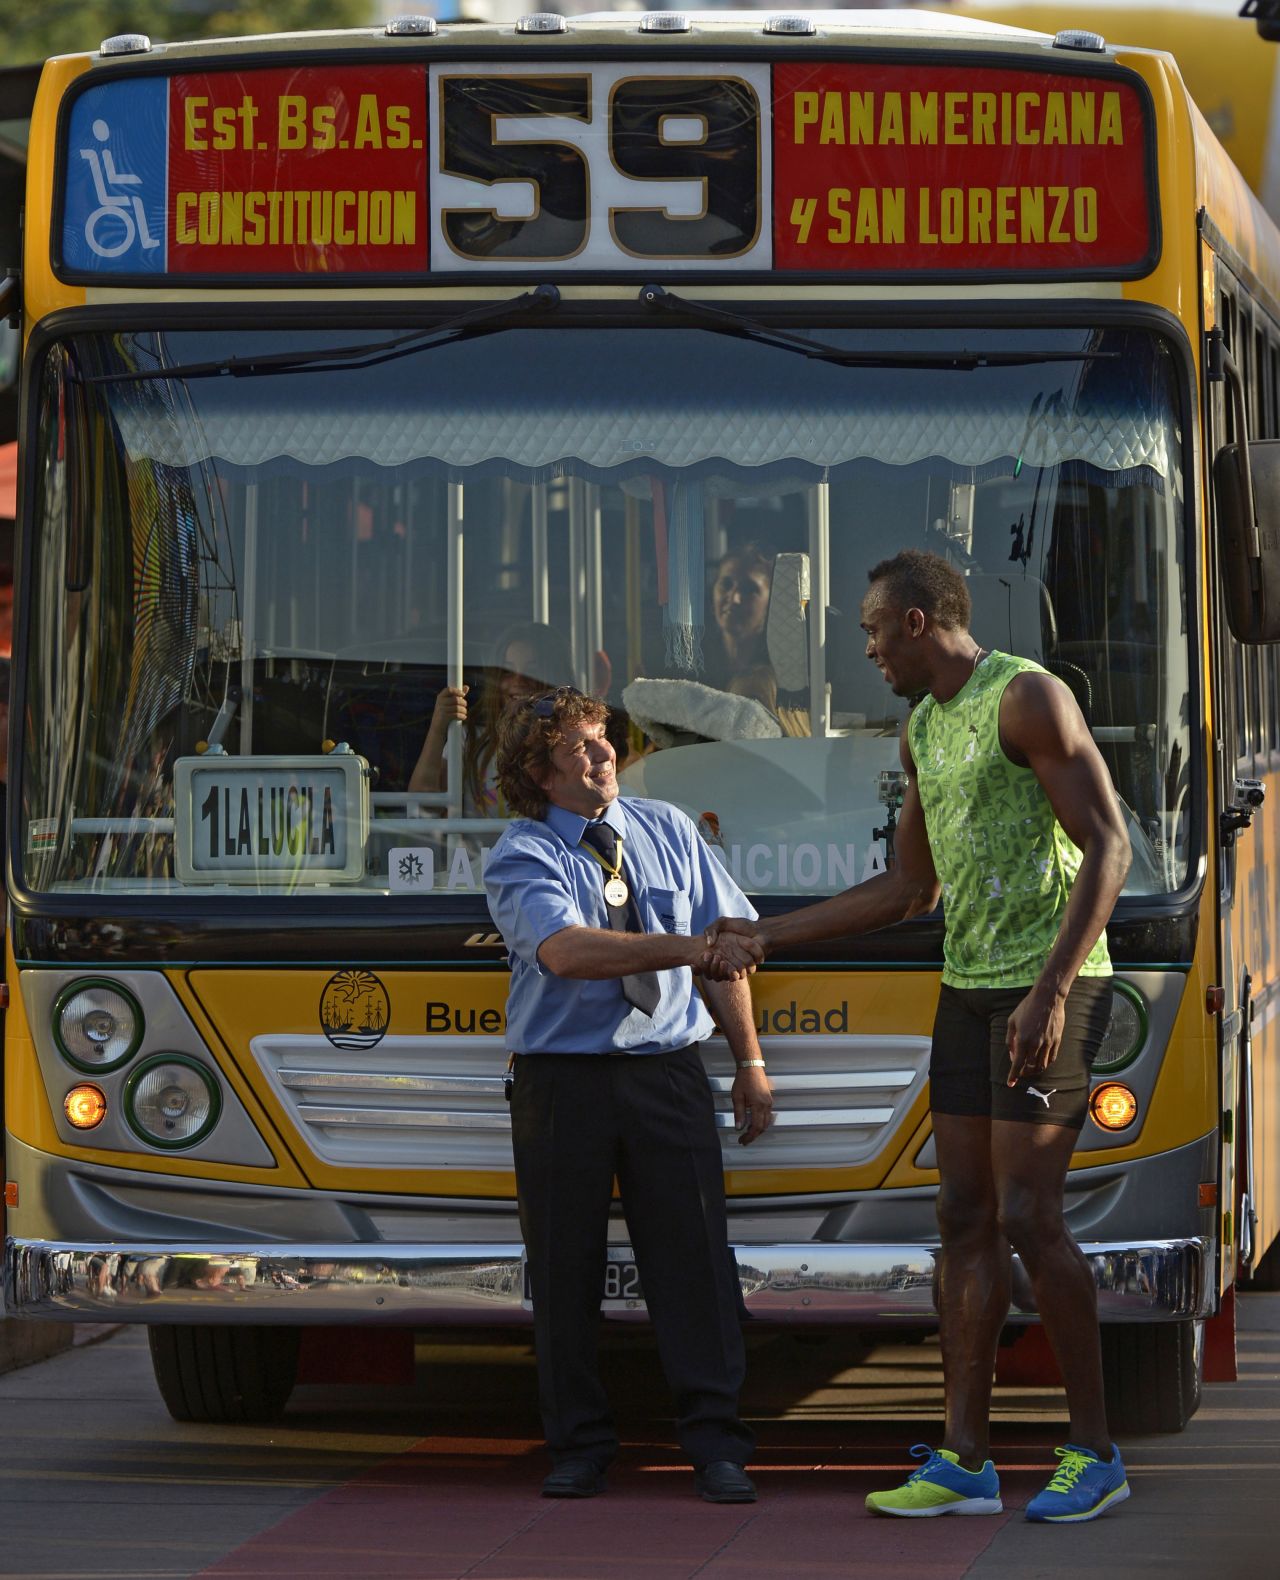 Bolt, who holds the world 100m record with a time of 9.58 seconds, completed the 80m race ahead of the public bus that was packed with passengers and afterward shook hands with the driver.